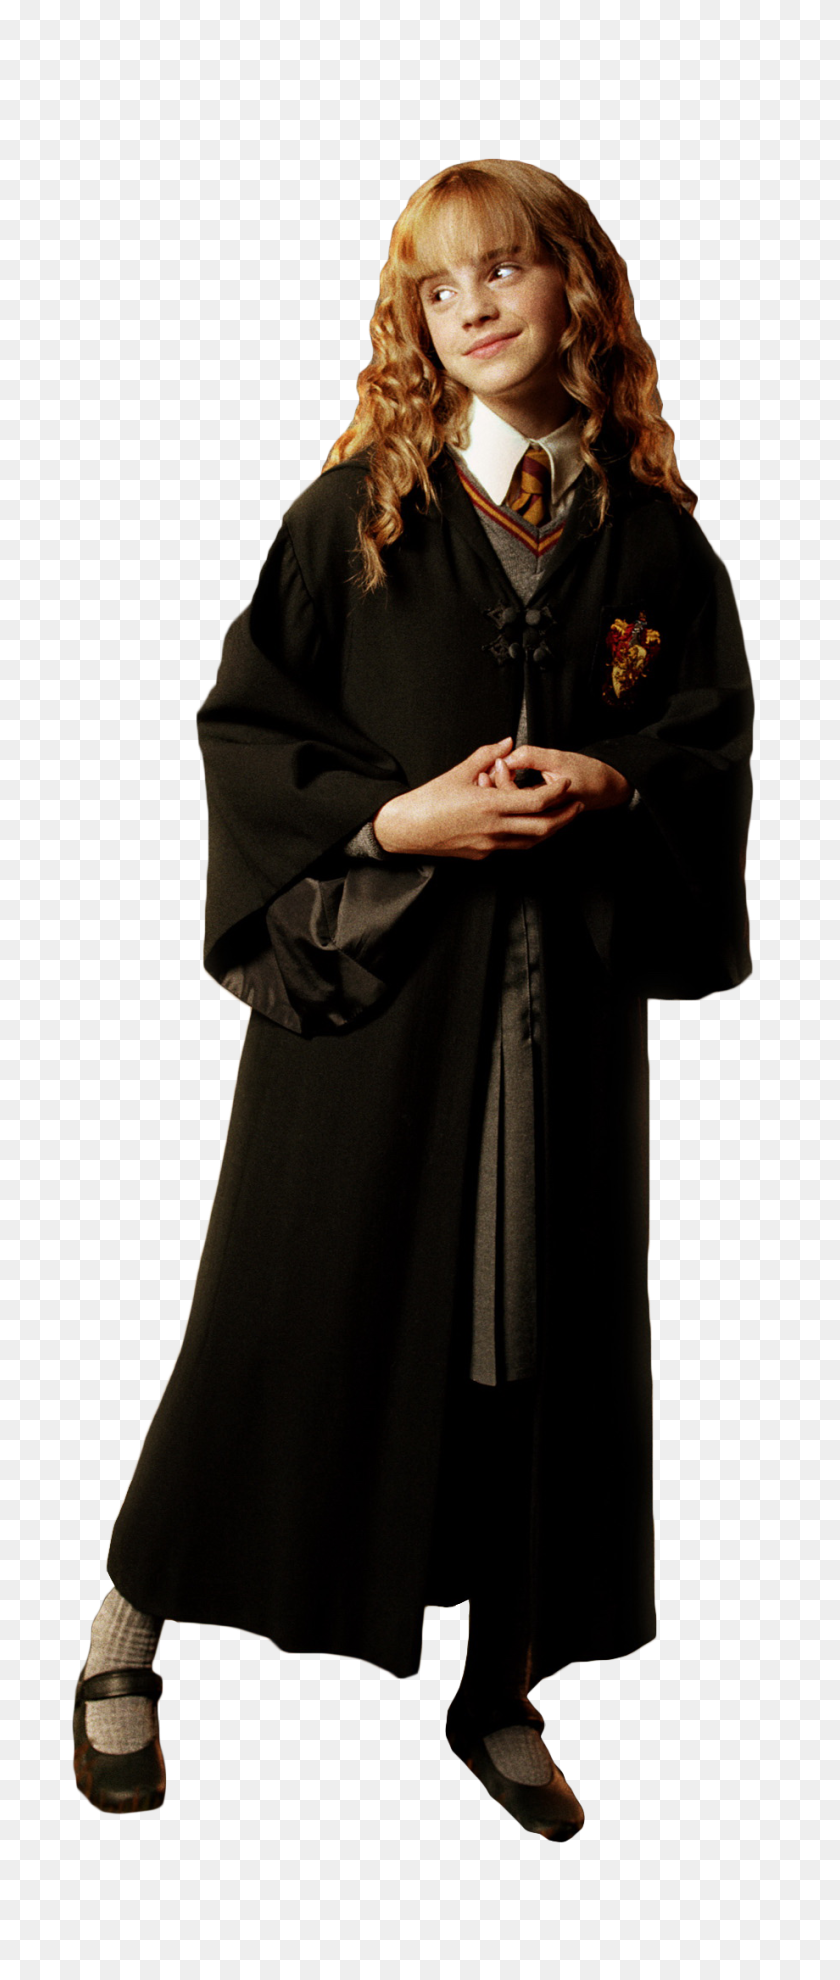 725x1920 Hermione Granger Harry Potter Characters - Hermione Granger PNG